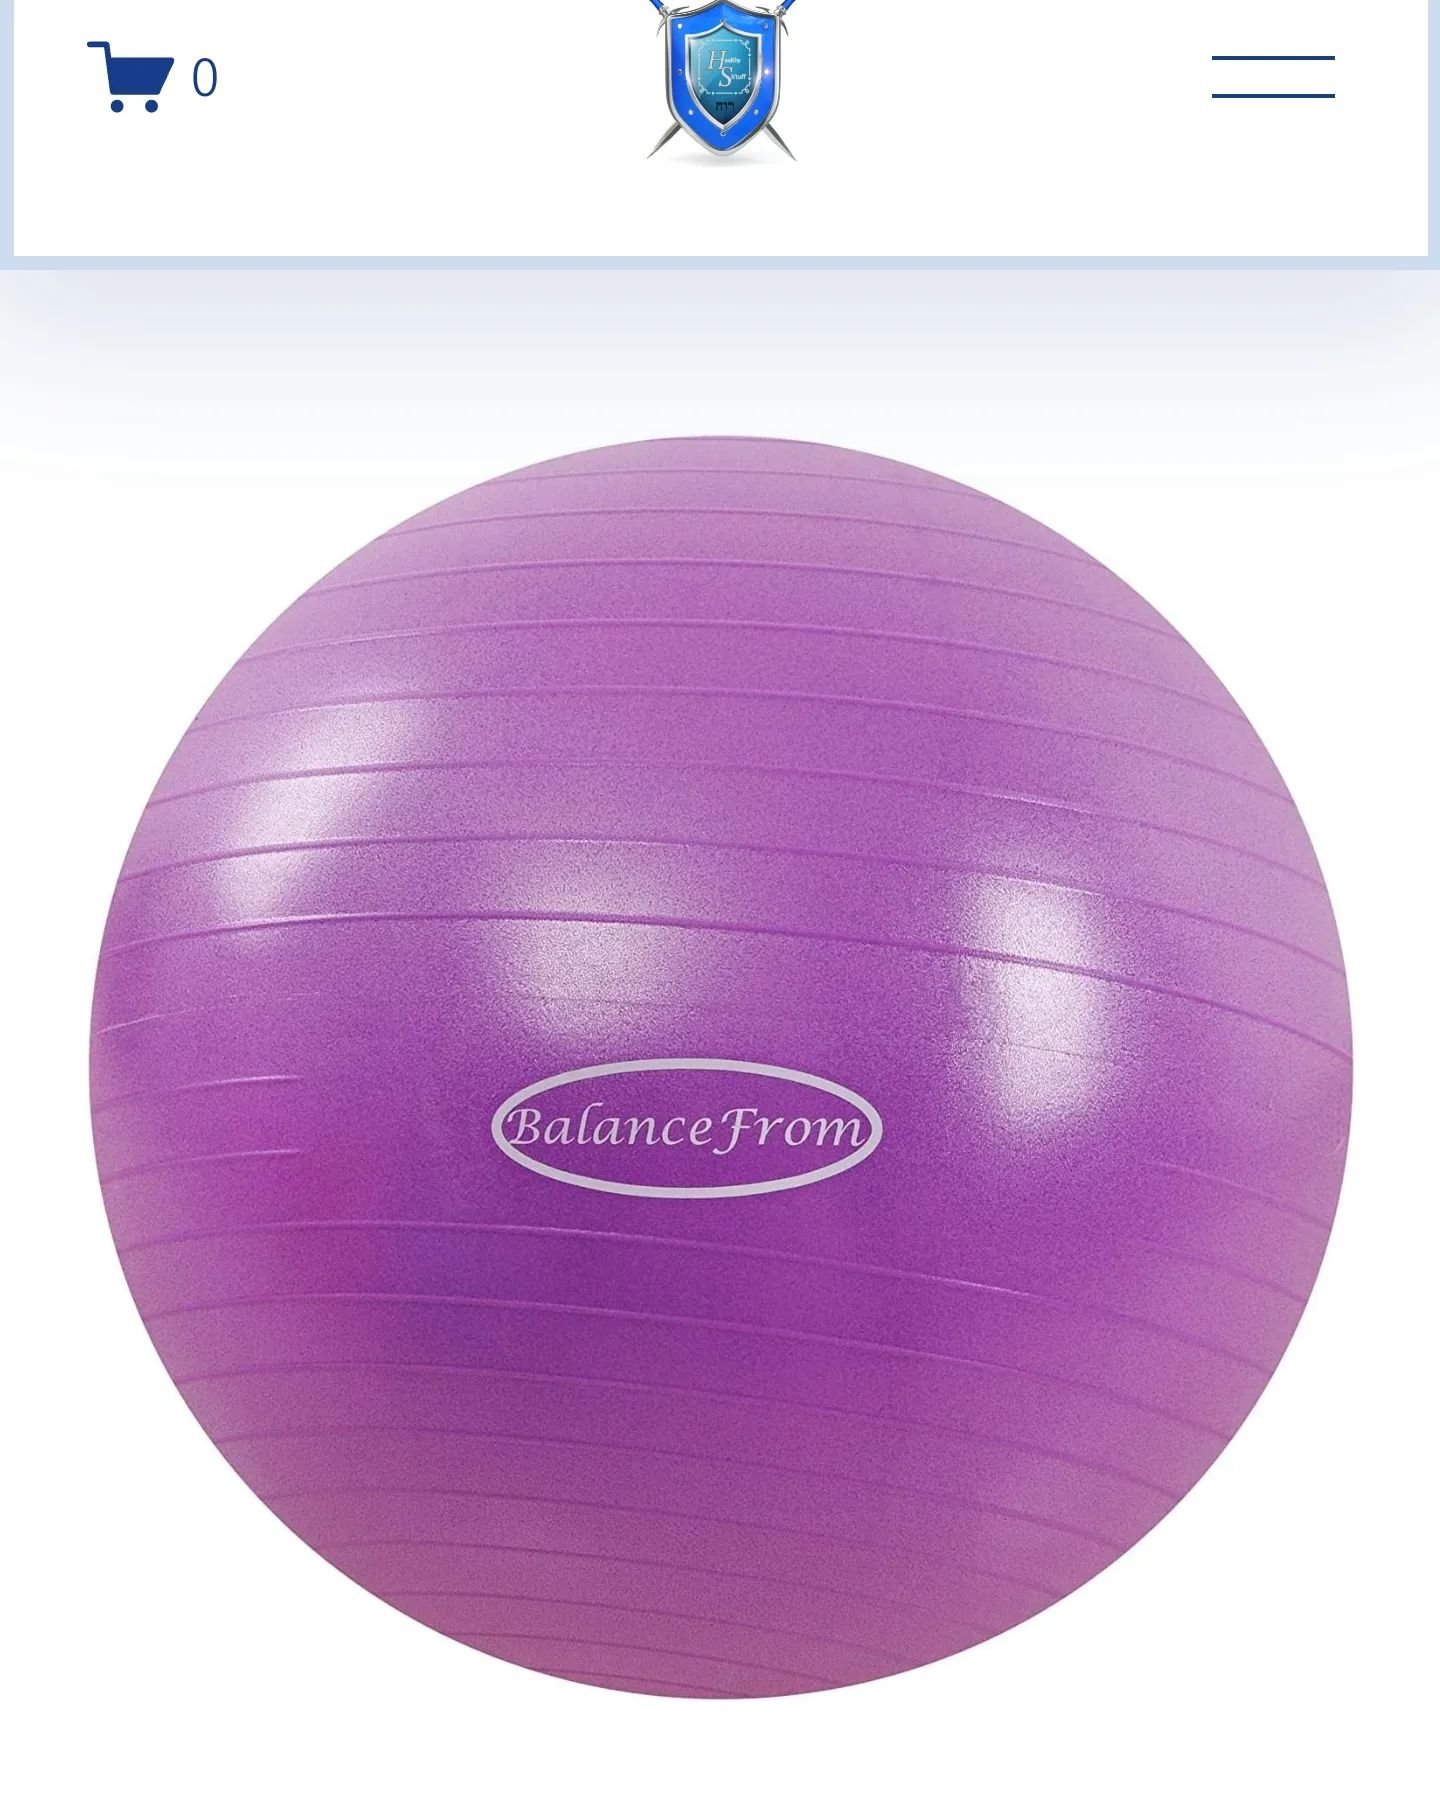 A simple toning exercise tool... The stability ball!  Get yours in our store. Replacing your office chair with a ball helps improve your posture and strengthen your core while you sit. Remember to sign up for emails to get your first discount code.  